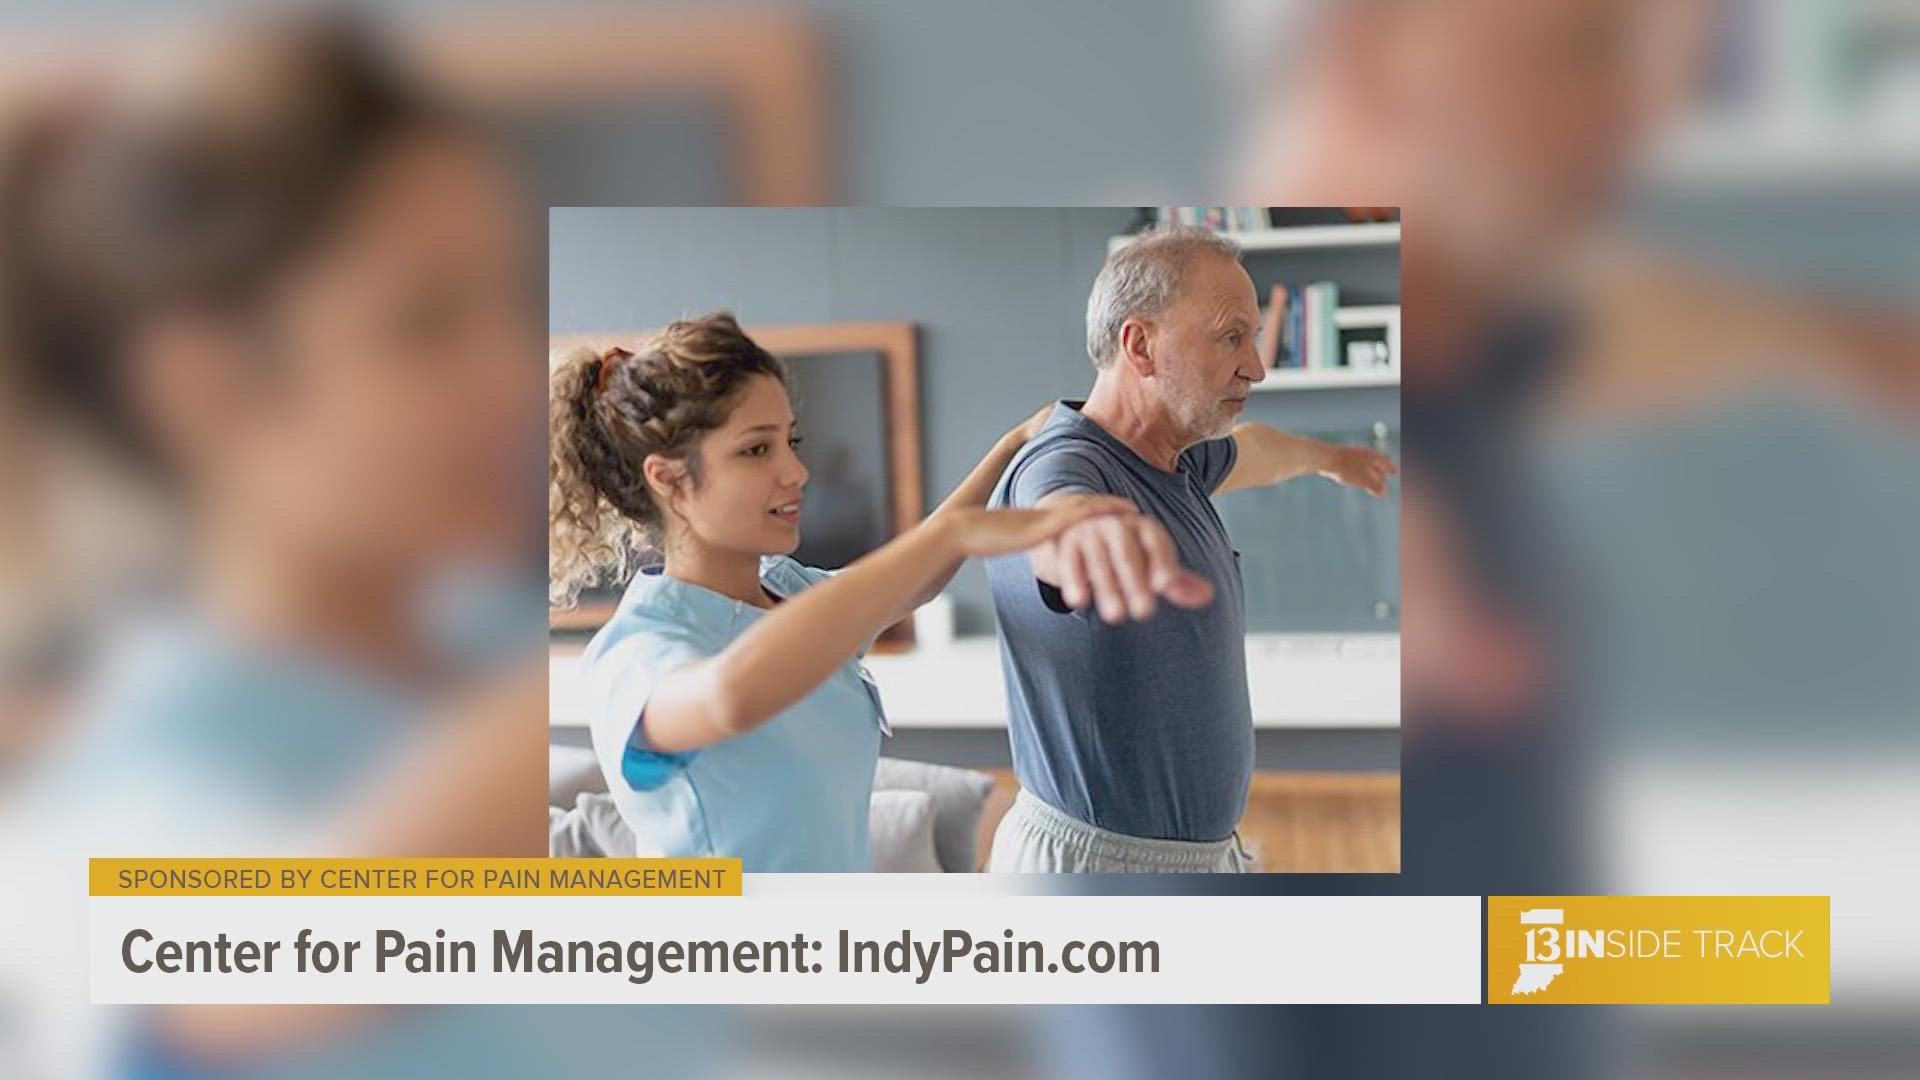 Low back pain is one of the leading causes of disability in the United States. Learn about treatment options from The Center for Pain Management.